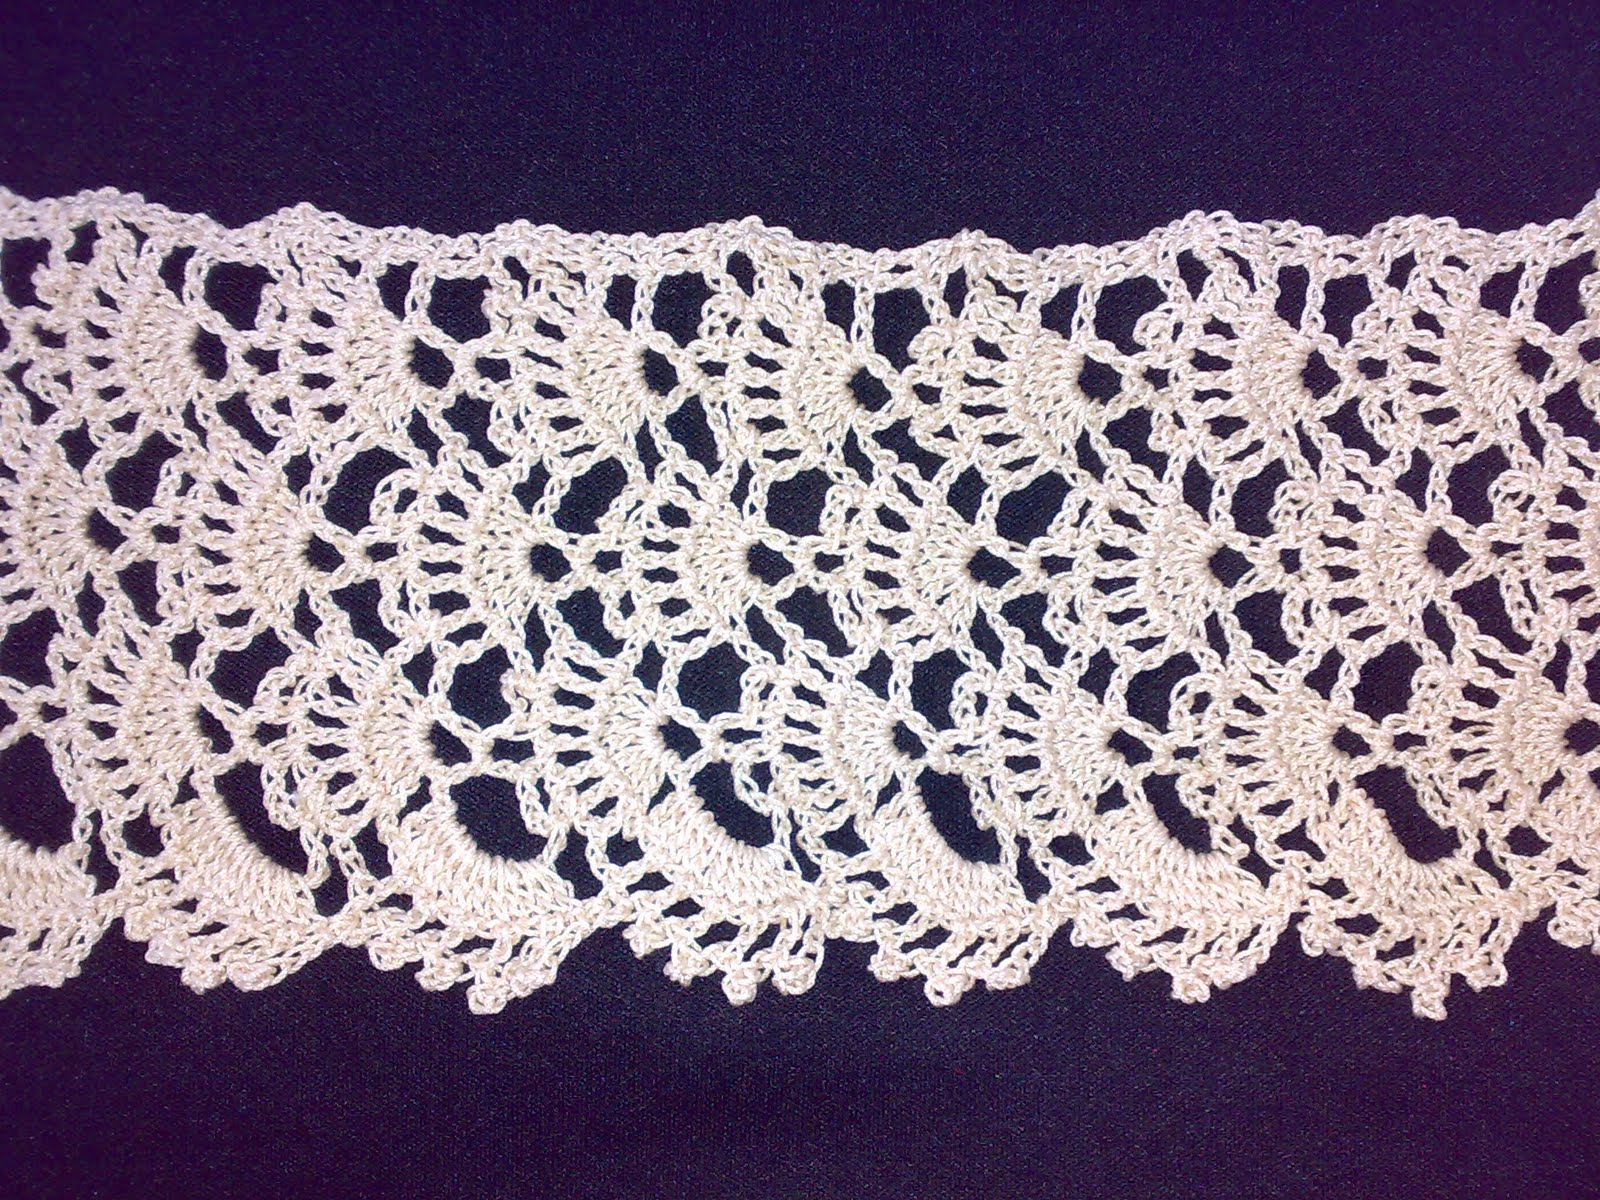 crochet of patterns laces A Life than Permits: Crochet Lace Time There's to More